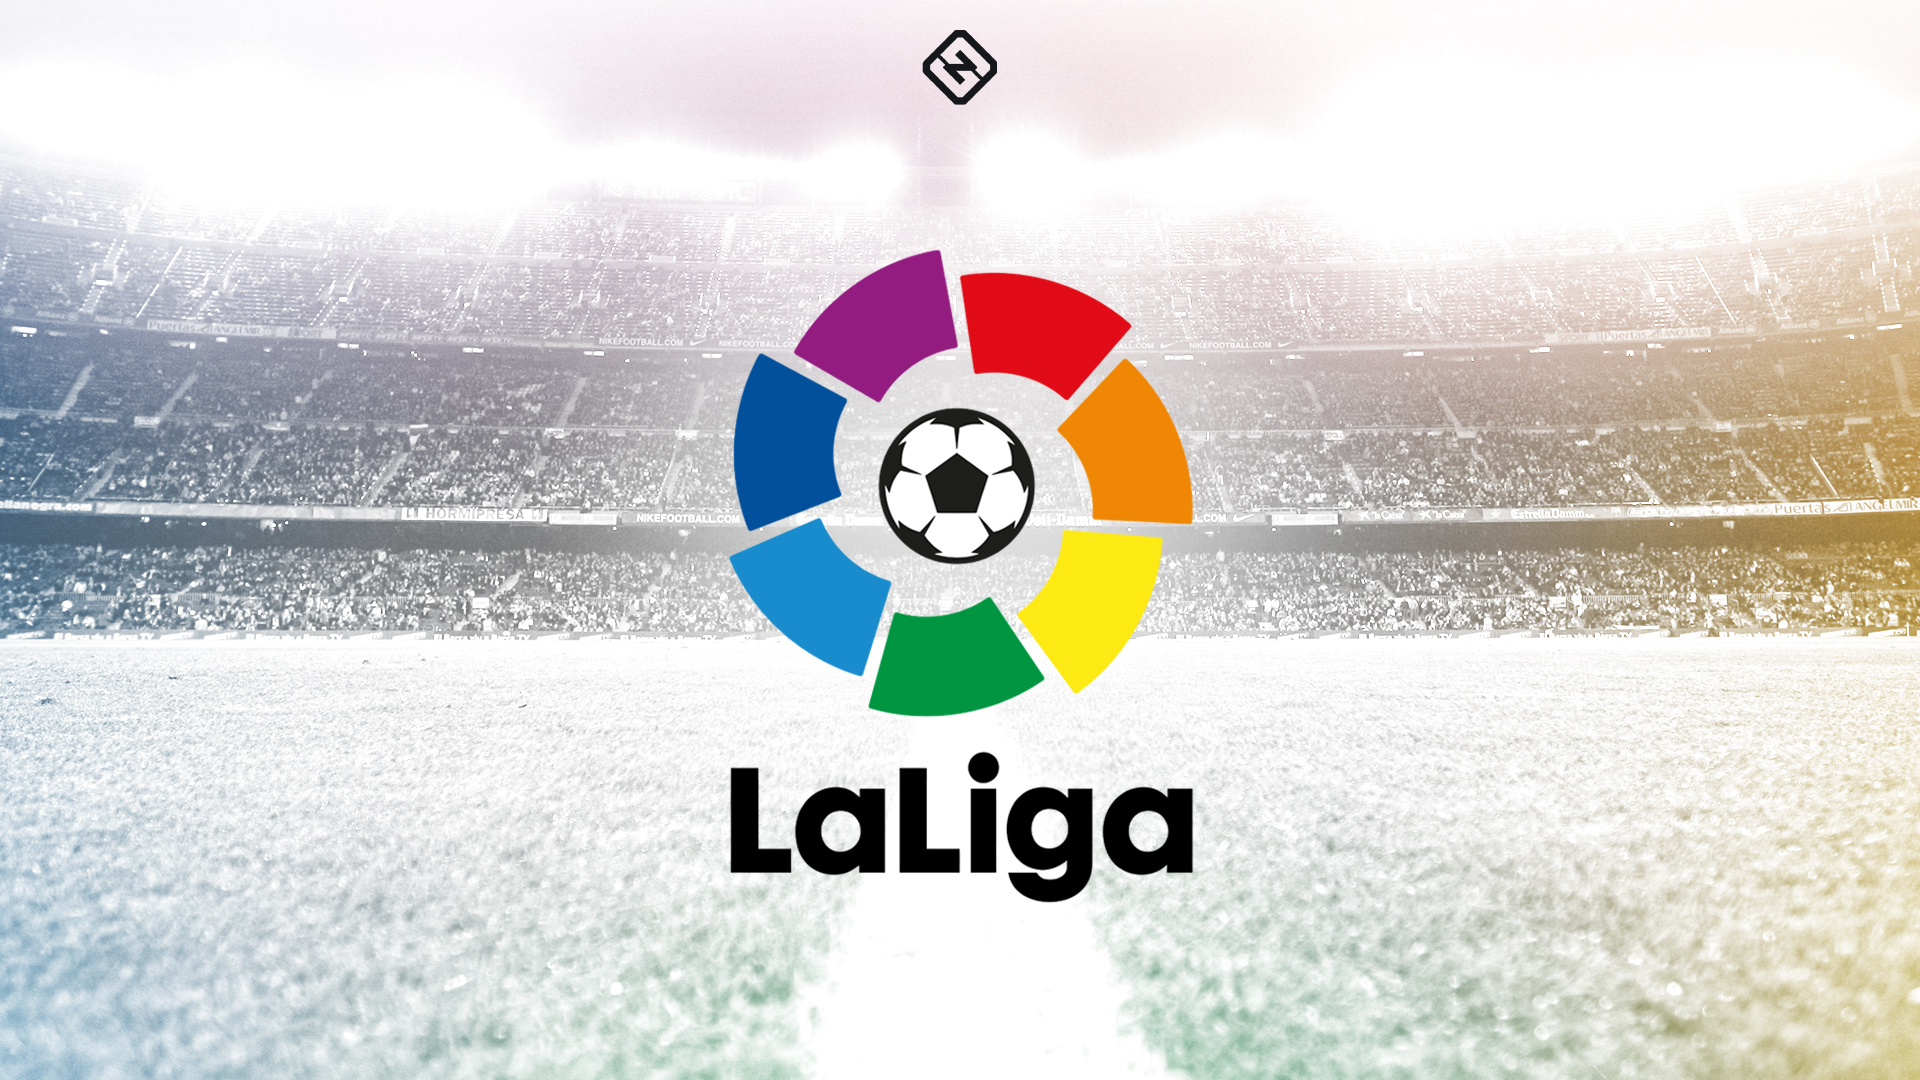 La Liga TV schedule, Football matches, Streaming services, Exciting encounters, 1920x1080 Full HD Desktop